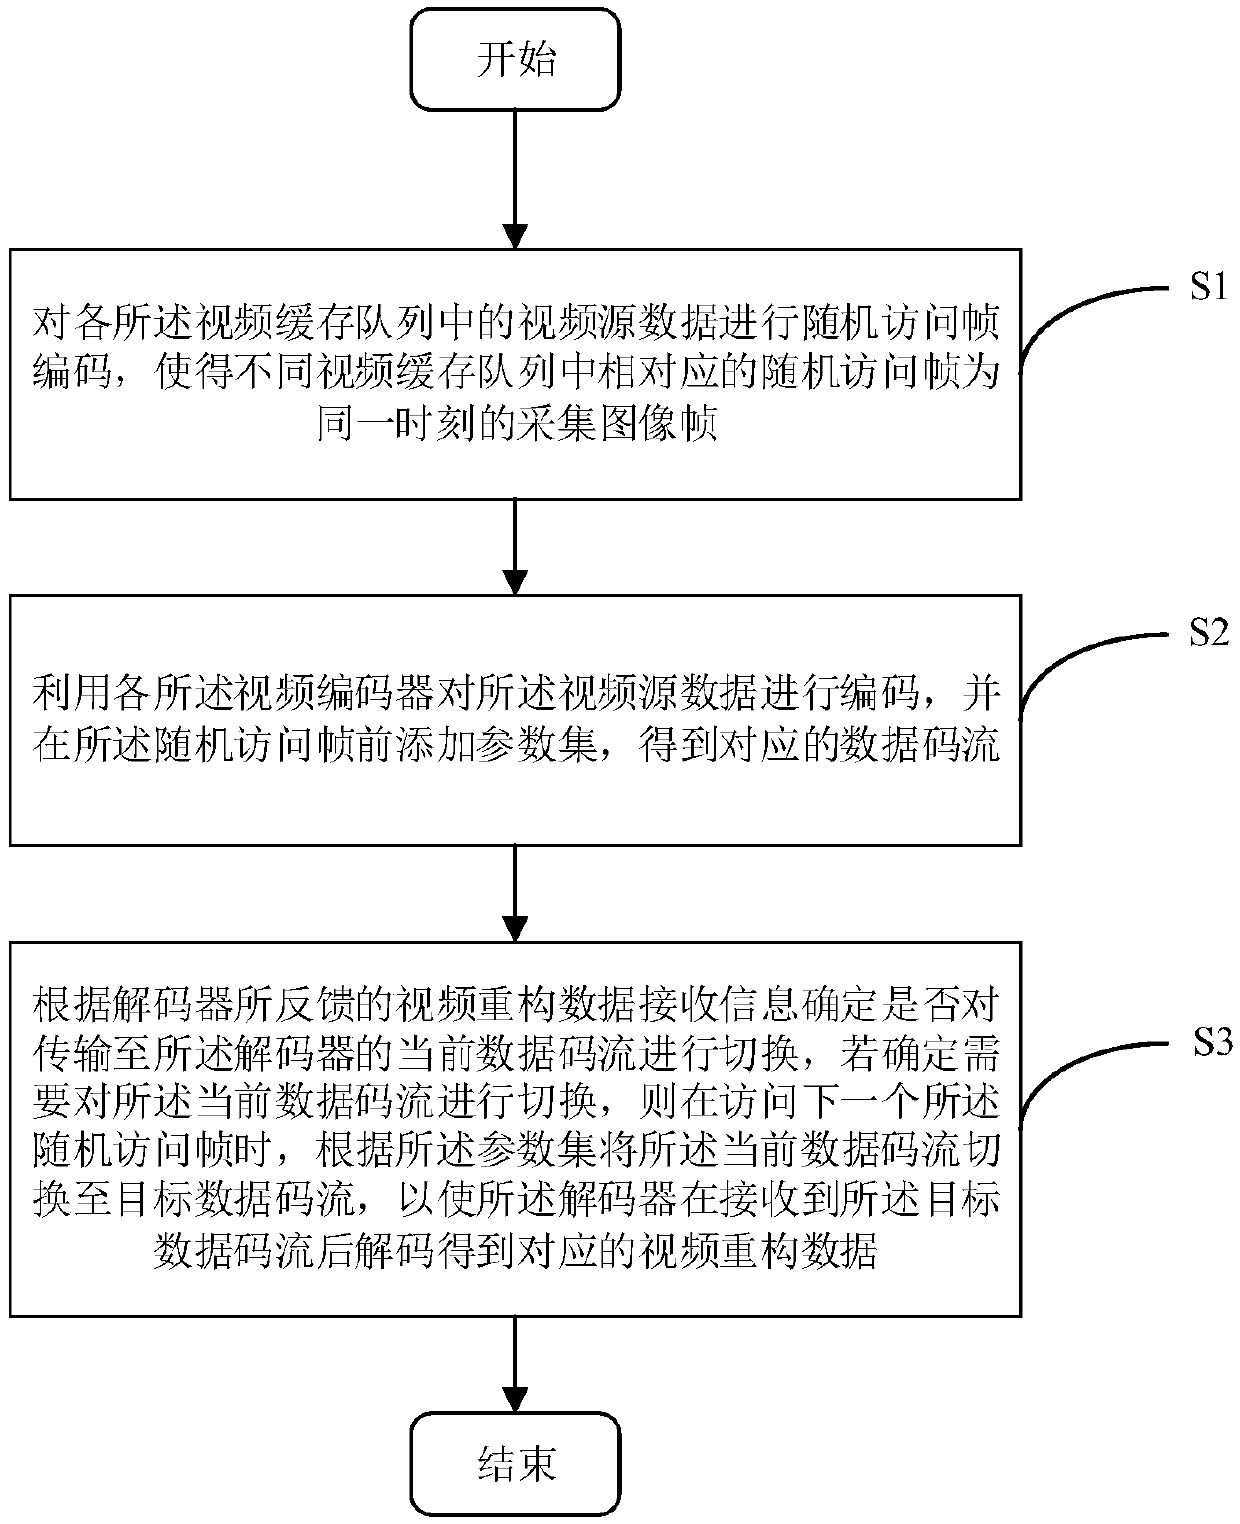 Video transmission method and device, electronic equipment and readable storage medium